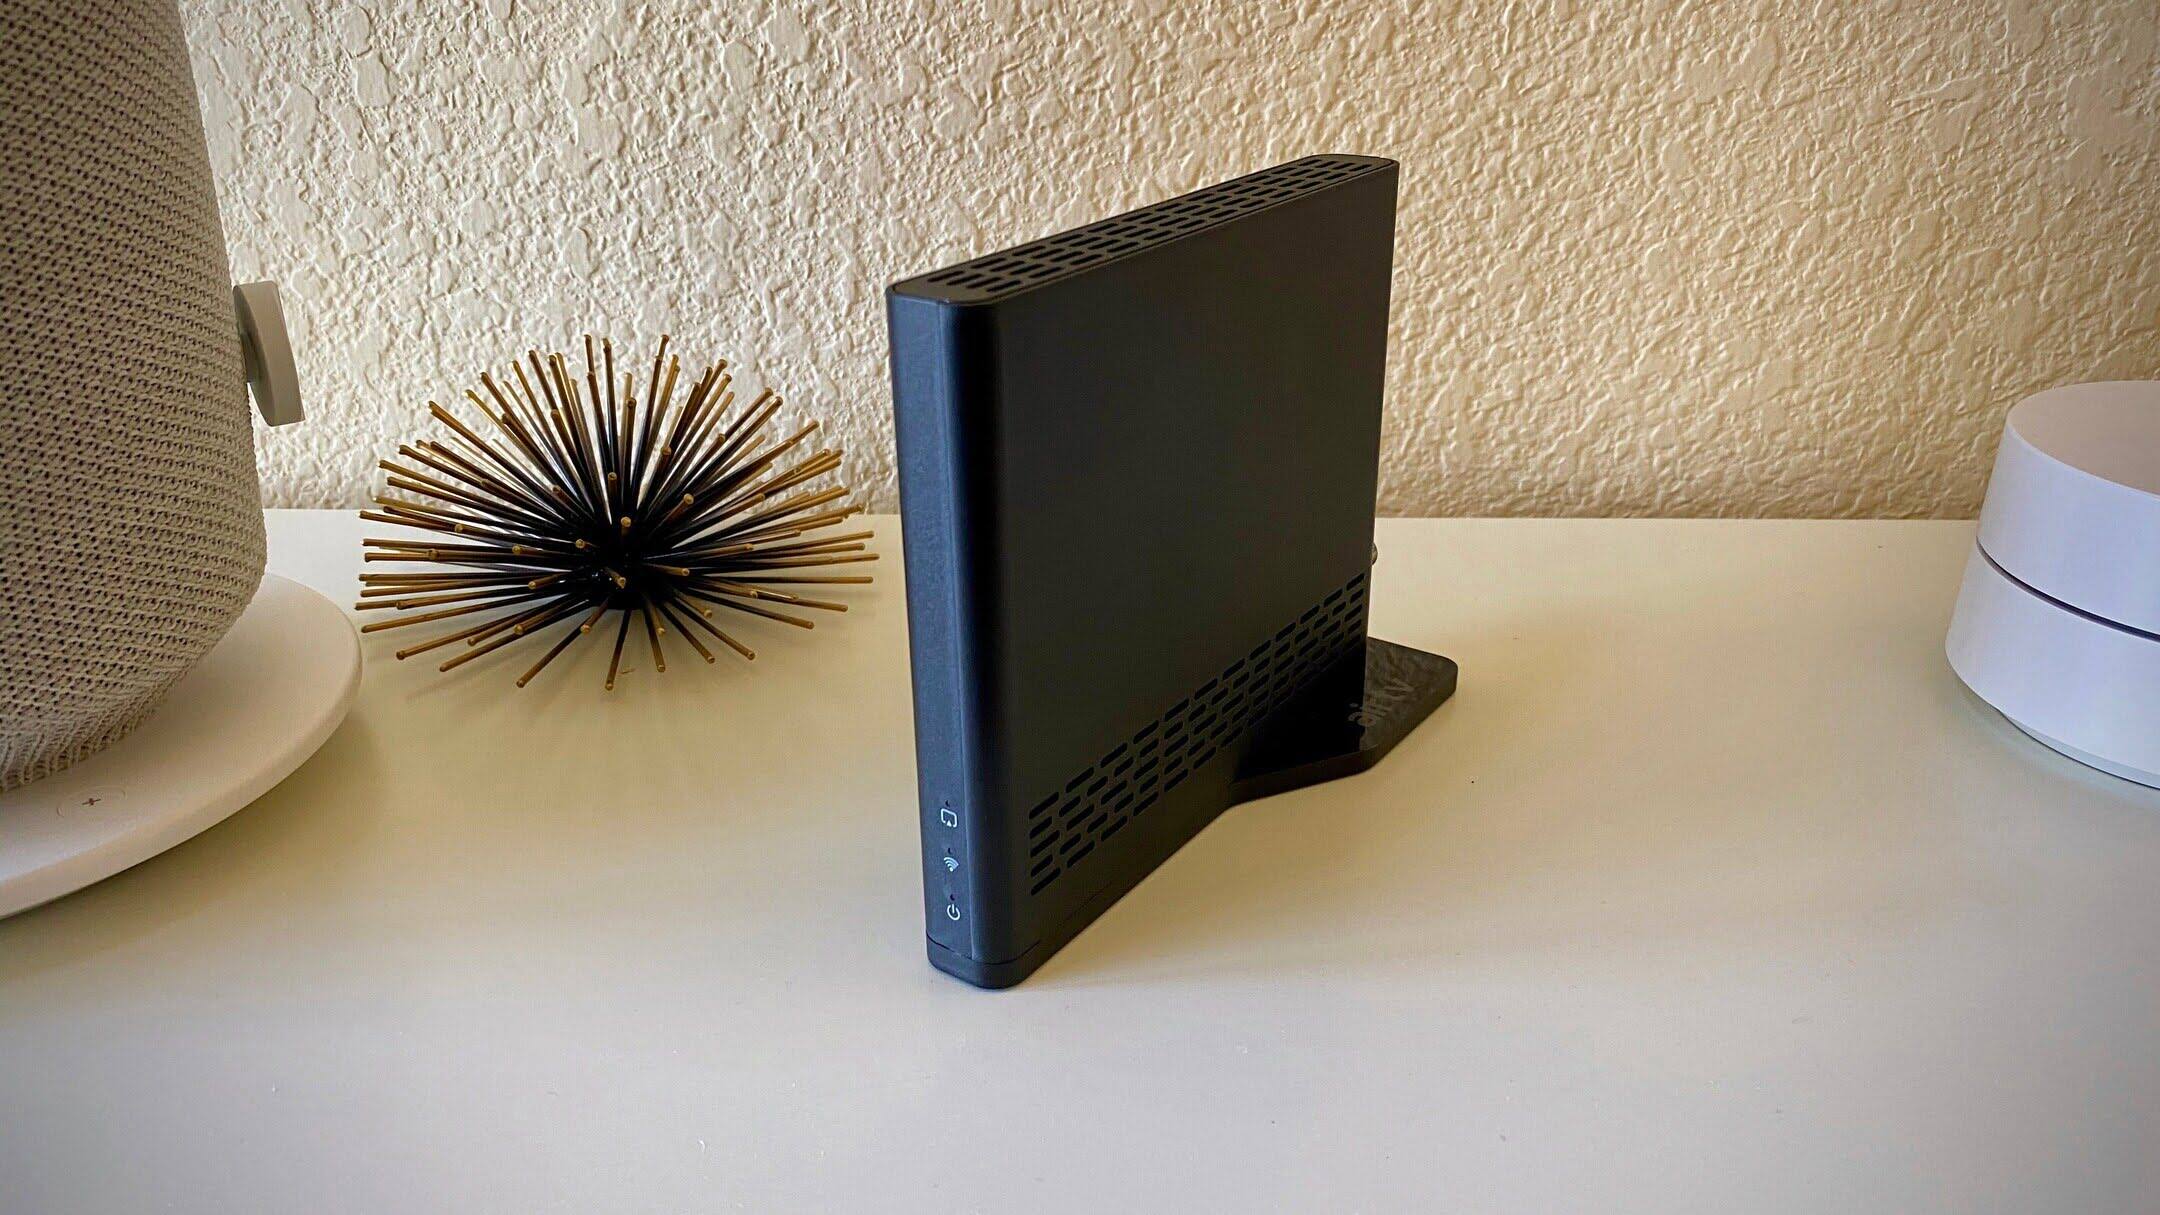 How To Connect DVR To Wi-Fi Router Without Cable